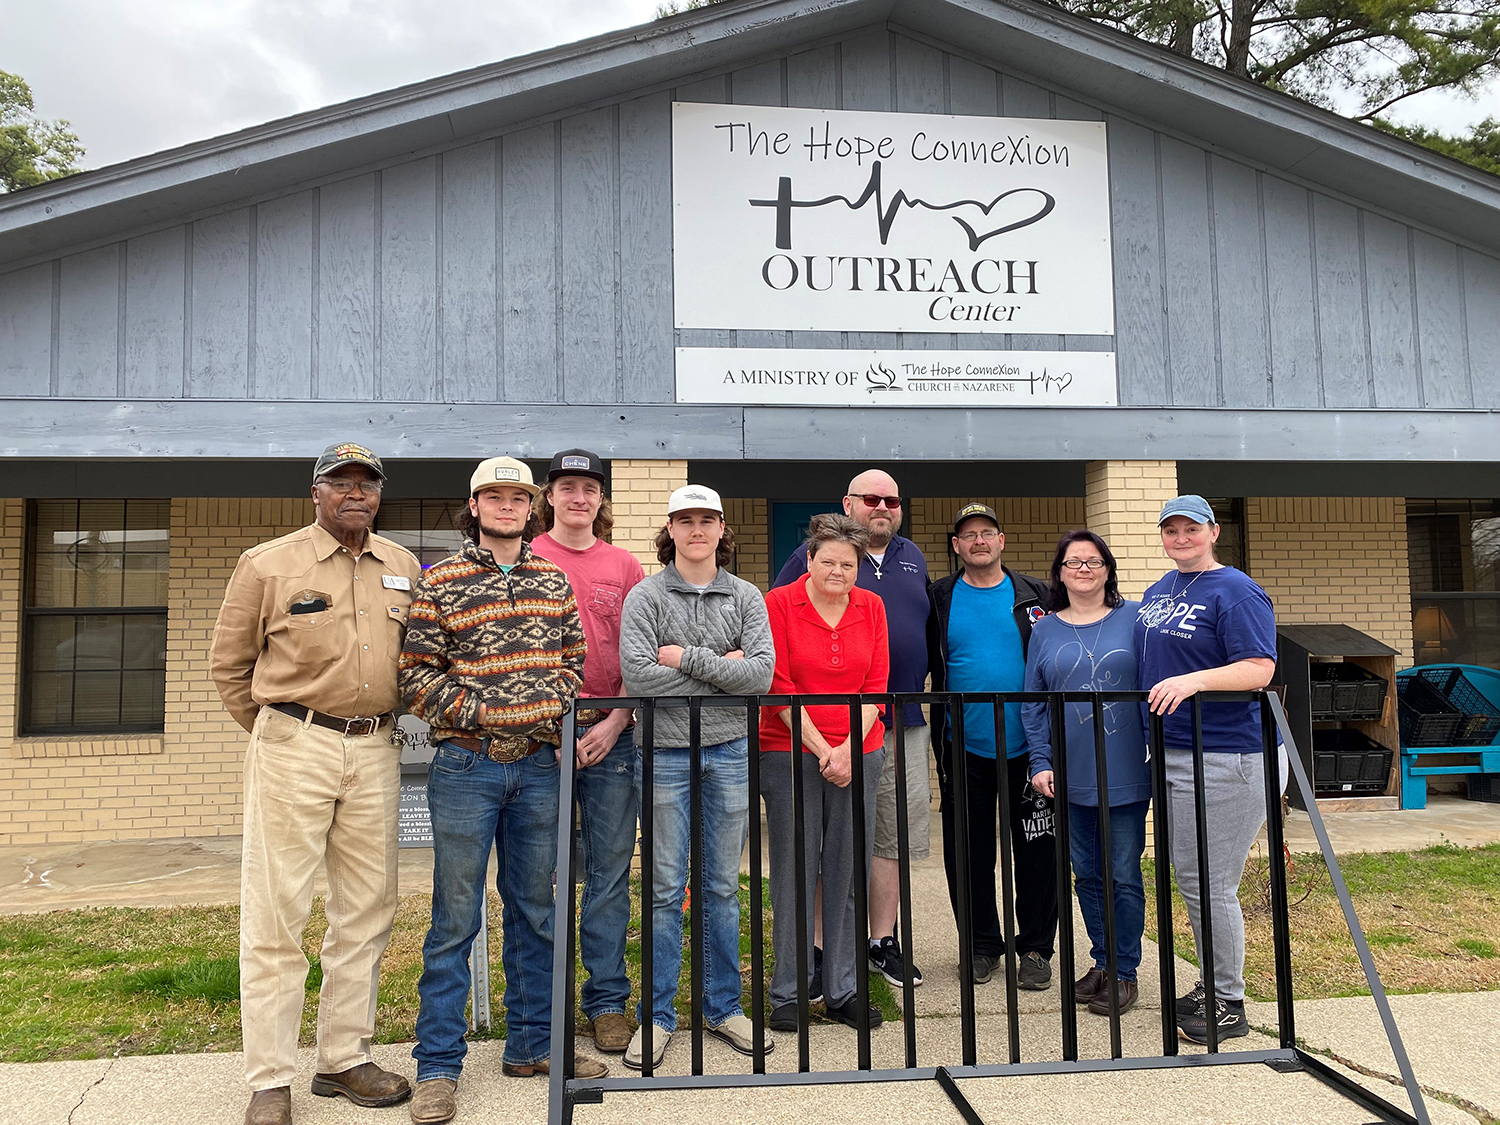 Pictured left to right: Eddie Thomas (UAHT Welding Instructor); Gavin Smith (Career Center Student from Spring Hill High School); Micah Hardee (Career Center Student from Spring Hill High School); Wesley Almand (Career Center Student from Nevada High School); Janie Head; Adam Perry (HCOC Board President); Phillip Lewis; Bonnie Lewis; Jennifer Martinez (HCOC Assistant Director)